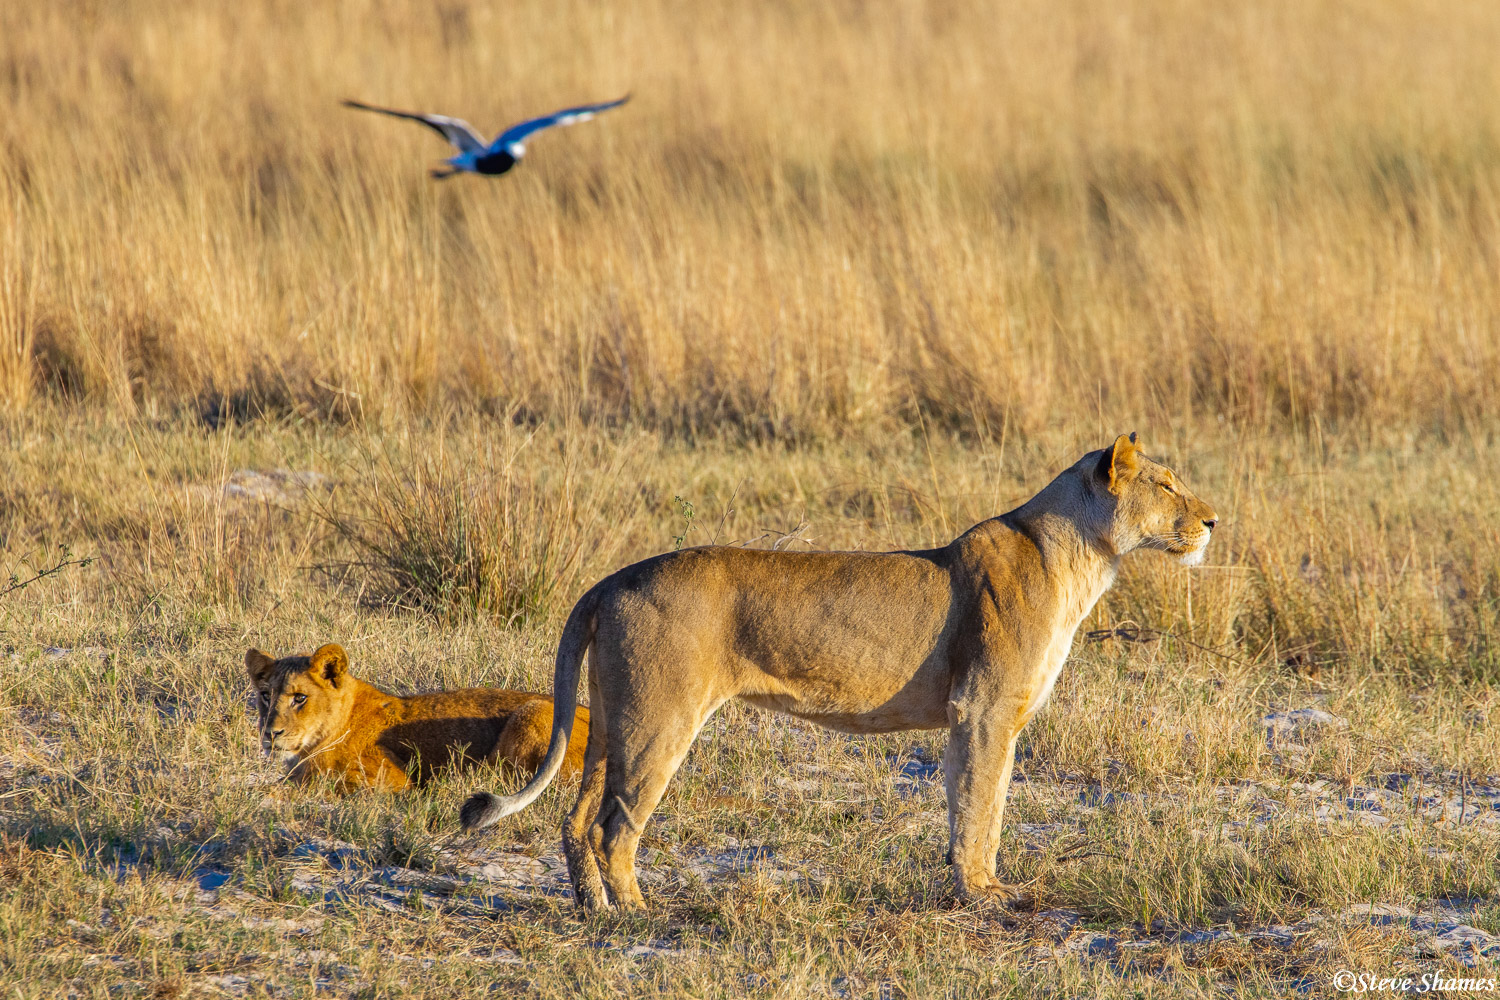 Lions on the lookout, at the Chobe River grassy marsh.